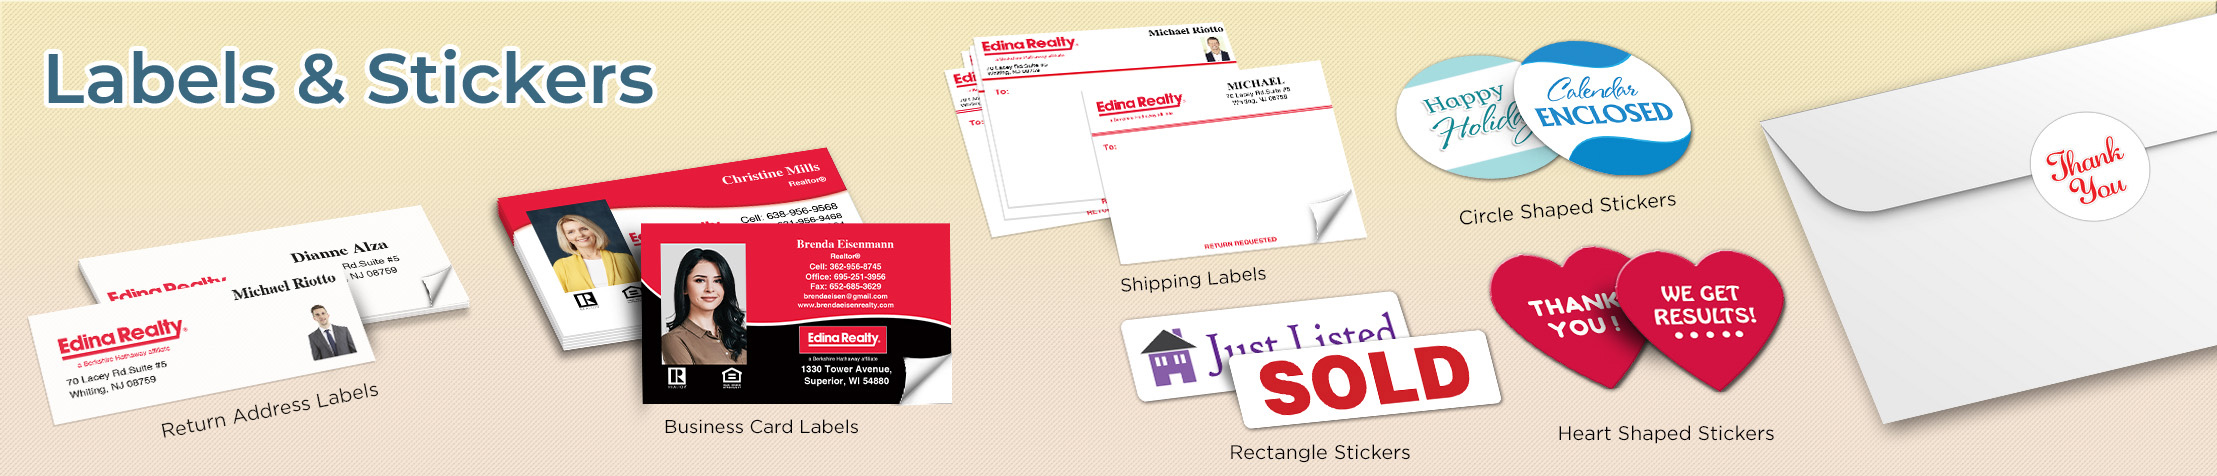 Edina Realty  Labels and Stickers - Edina Realty  business card labels, return address labels, shipping labels, and assorted stickers | BestPrintBuy.com